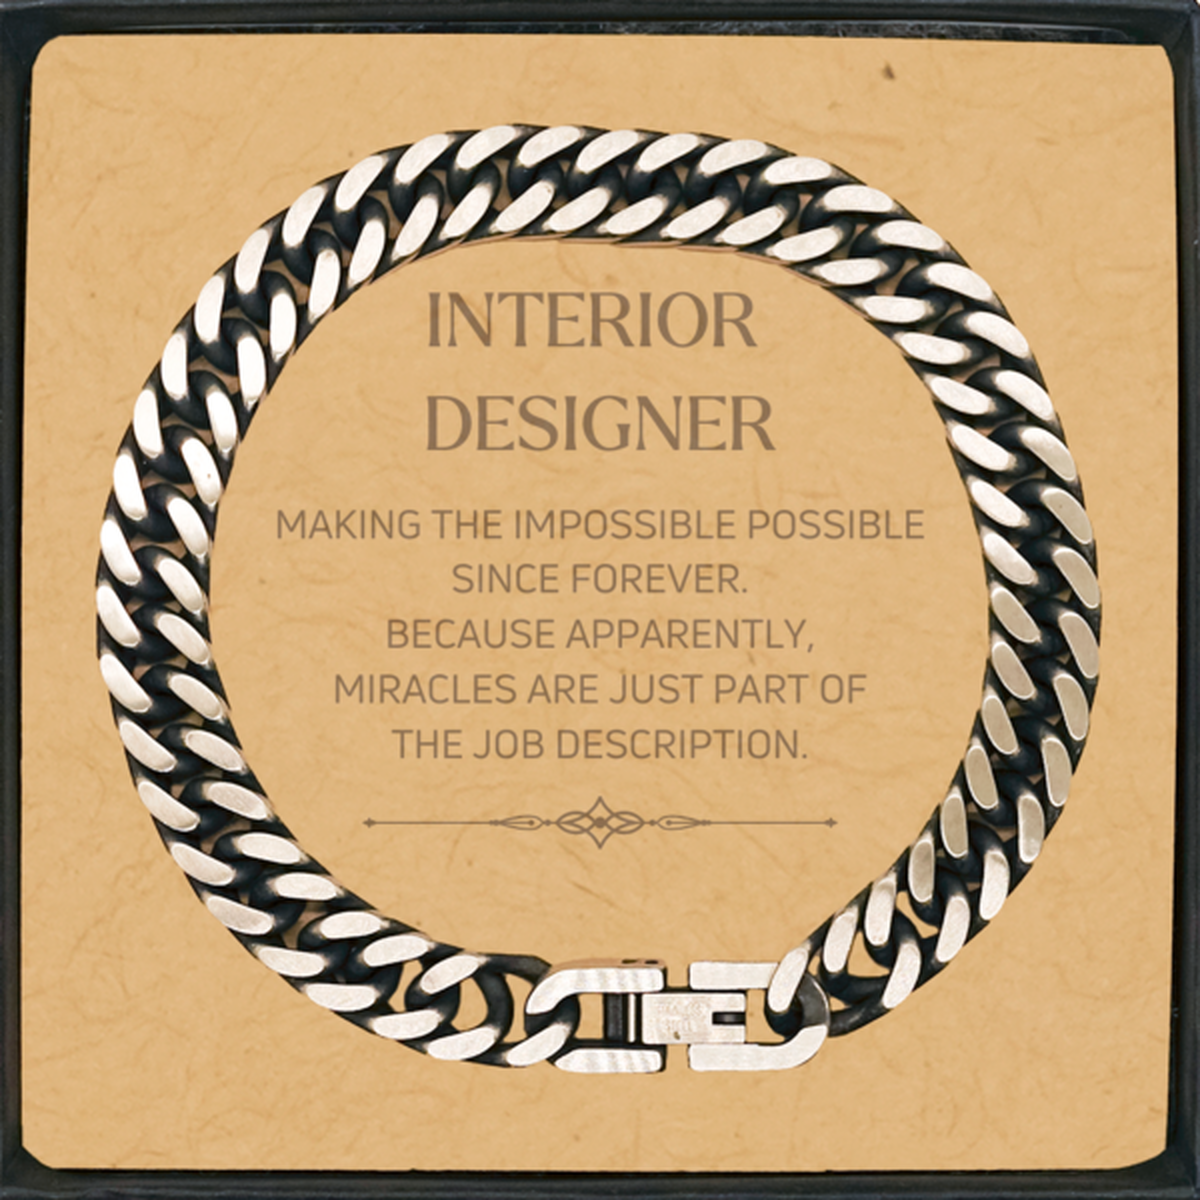 Funny Interior Designer Gifts, Miracles are just part of the job description, Inspirational Birthday Cuban Link Chain Bracelet For Interior Designer, Men, Women, Coworkers, Friends, Boss